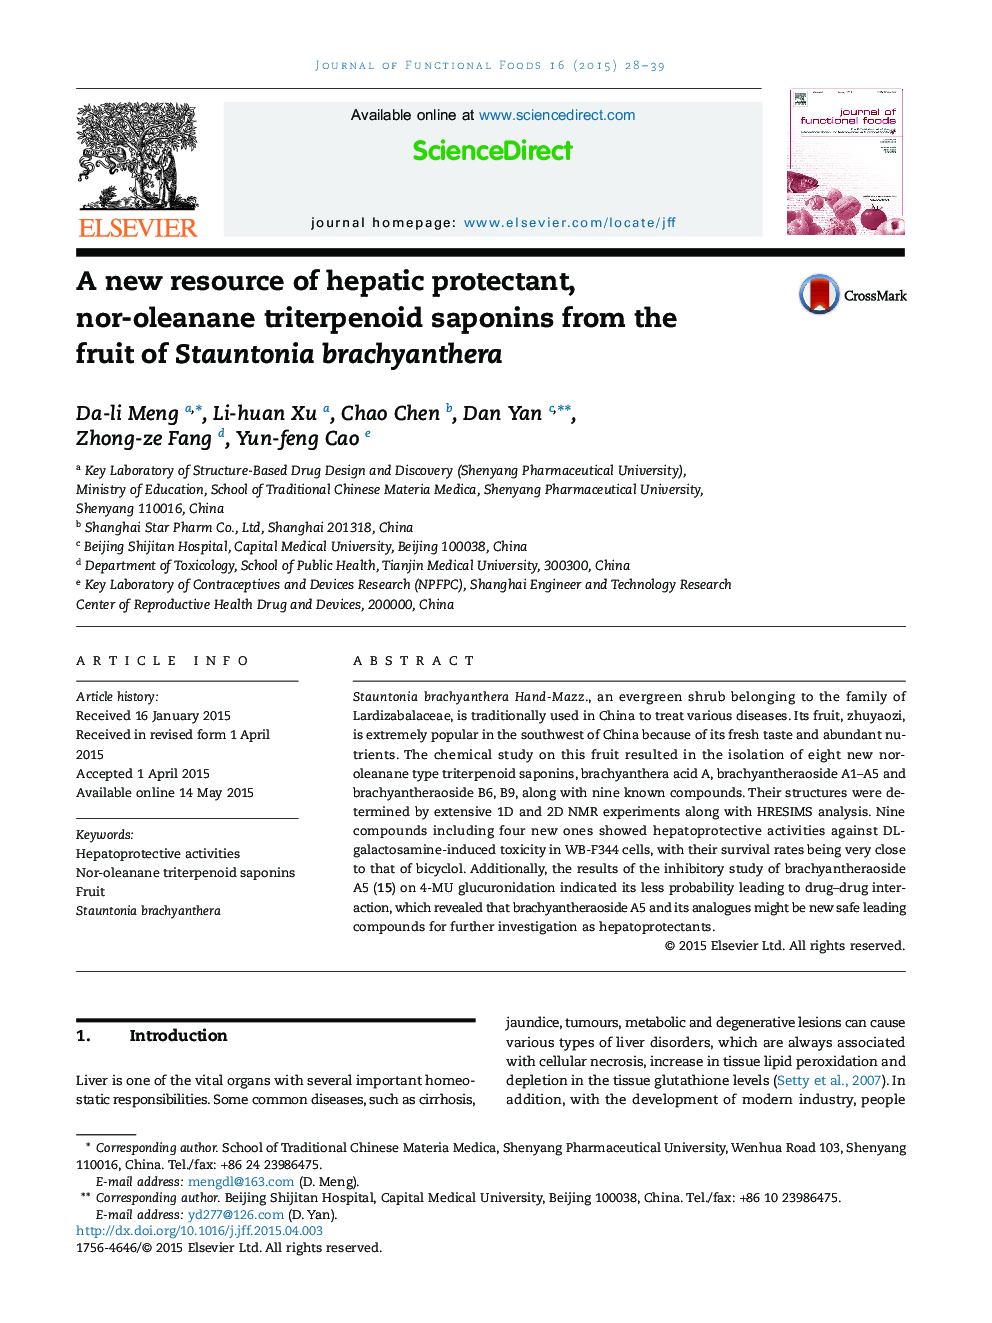 A new resource of hepatic protectant, nor-oleanane triterpenoid saponins from the fruit of Stauntonia brachyanthera